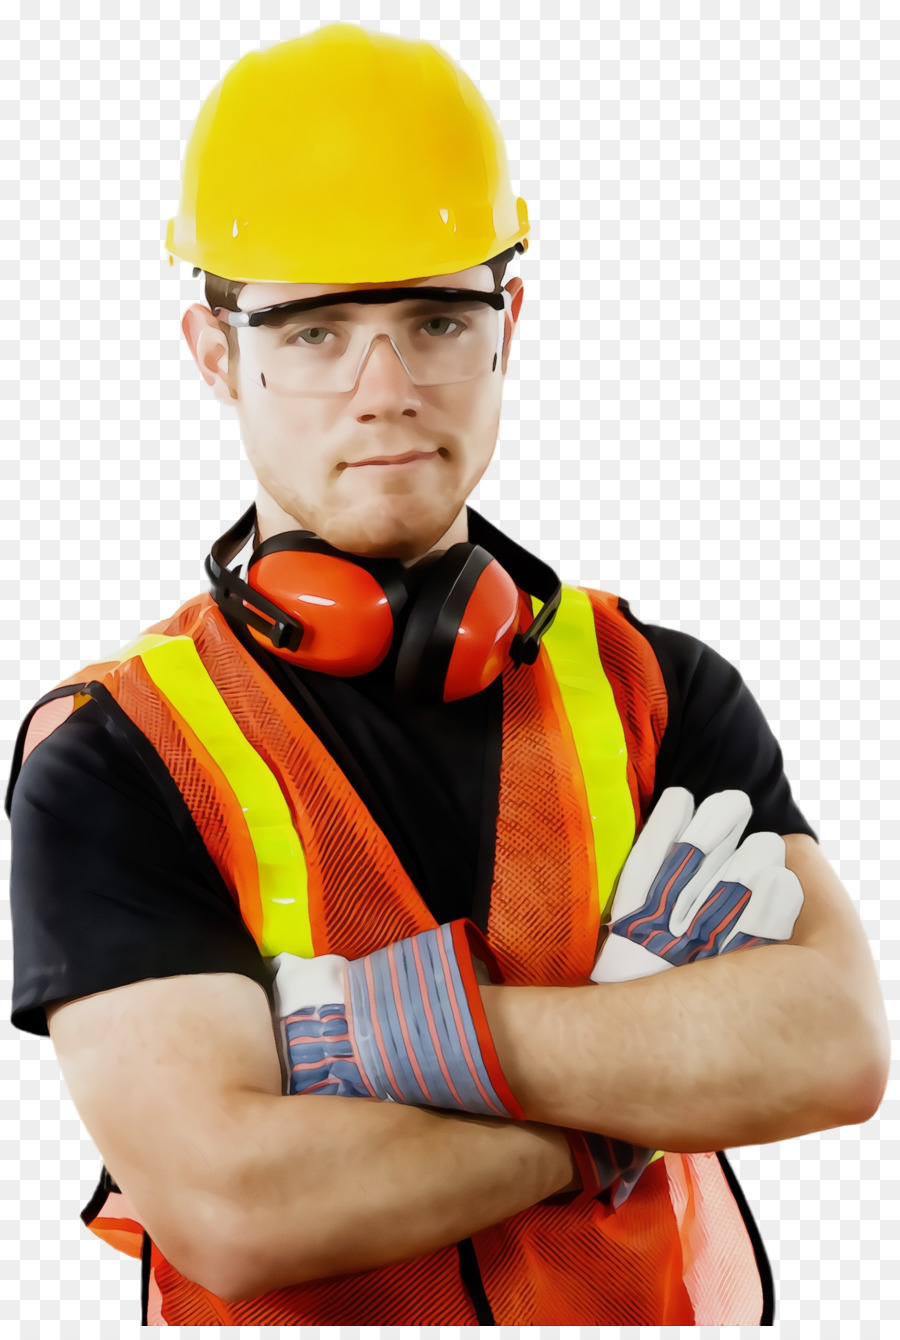 hard hat personal protective equipment high-visibility clothing hat construction worker